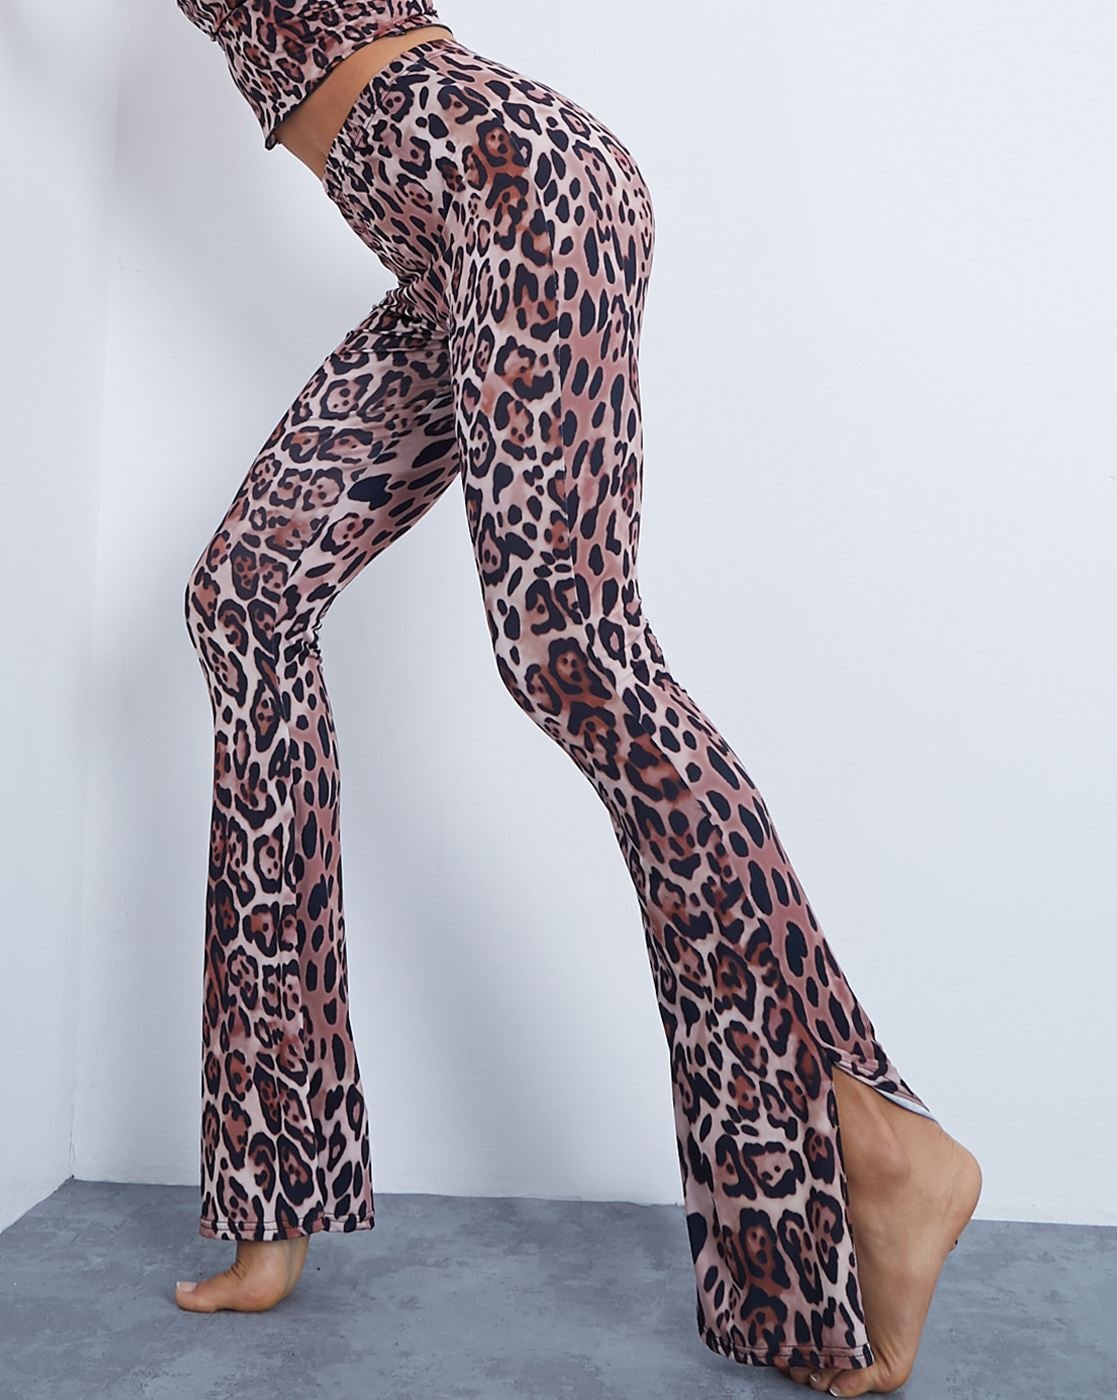 Mimi's House Boutique - Mooove over 🐄 leopard and zebra, there's a new  animal print arrival! Our Cow Print Bell Bottom Pants are on trend & the  perfect wow piece to upgrade